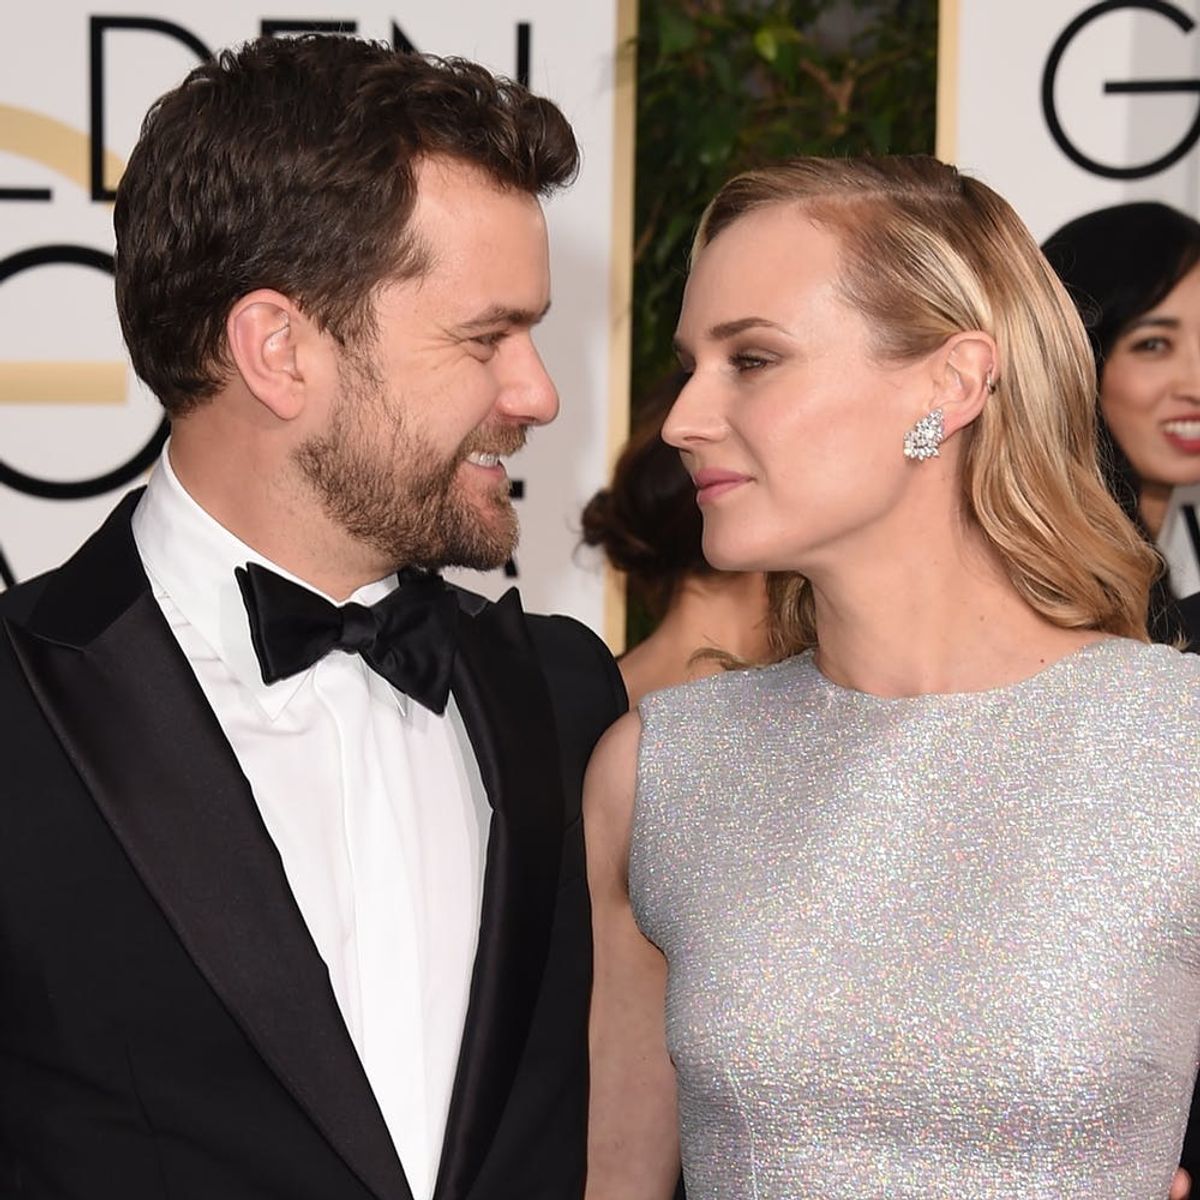 Diane Kruger Says Her Split From Joshua Jackson ‘Was a Long Time Coming’